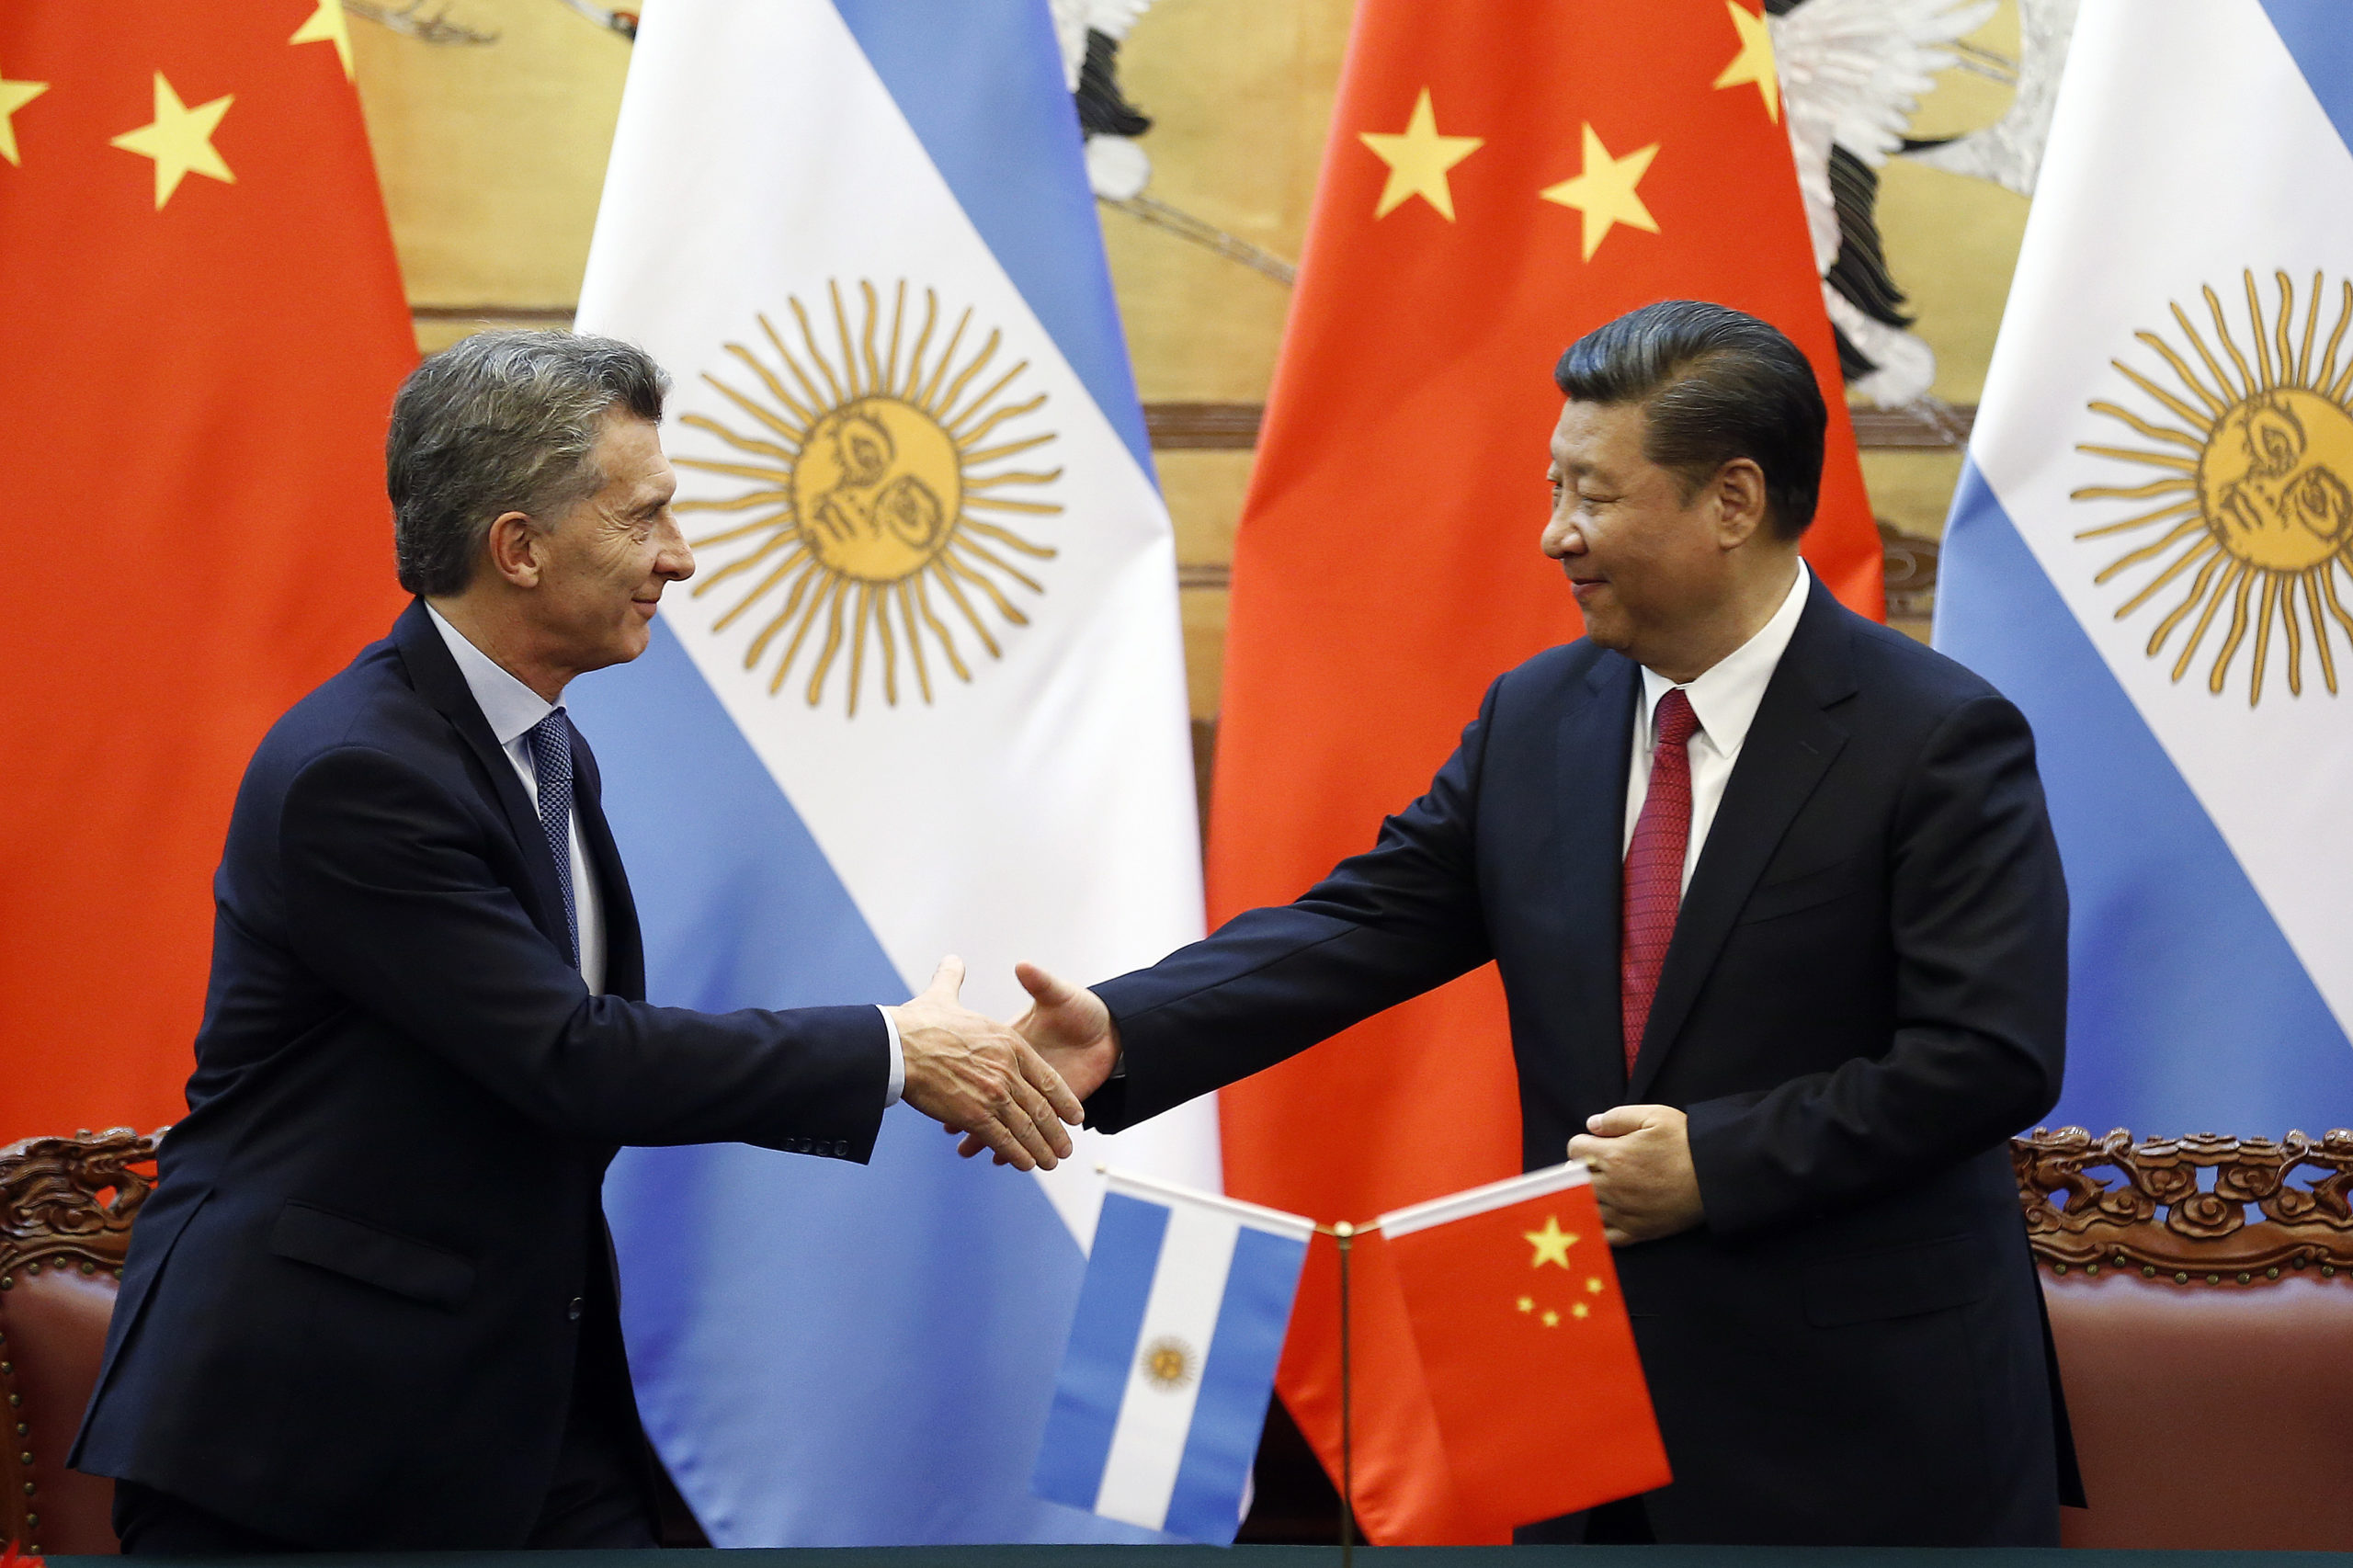 Chinese President Xi Jinping and Argentina's President Mauricio Macri attend a signing ceremony at the Great Hall of the People on May 17, 2017 in Beijing, China. (Photo by Damir Sagolj/Pool/Getty Images)